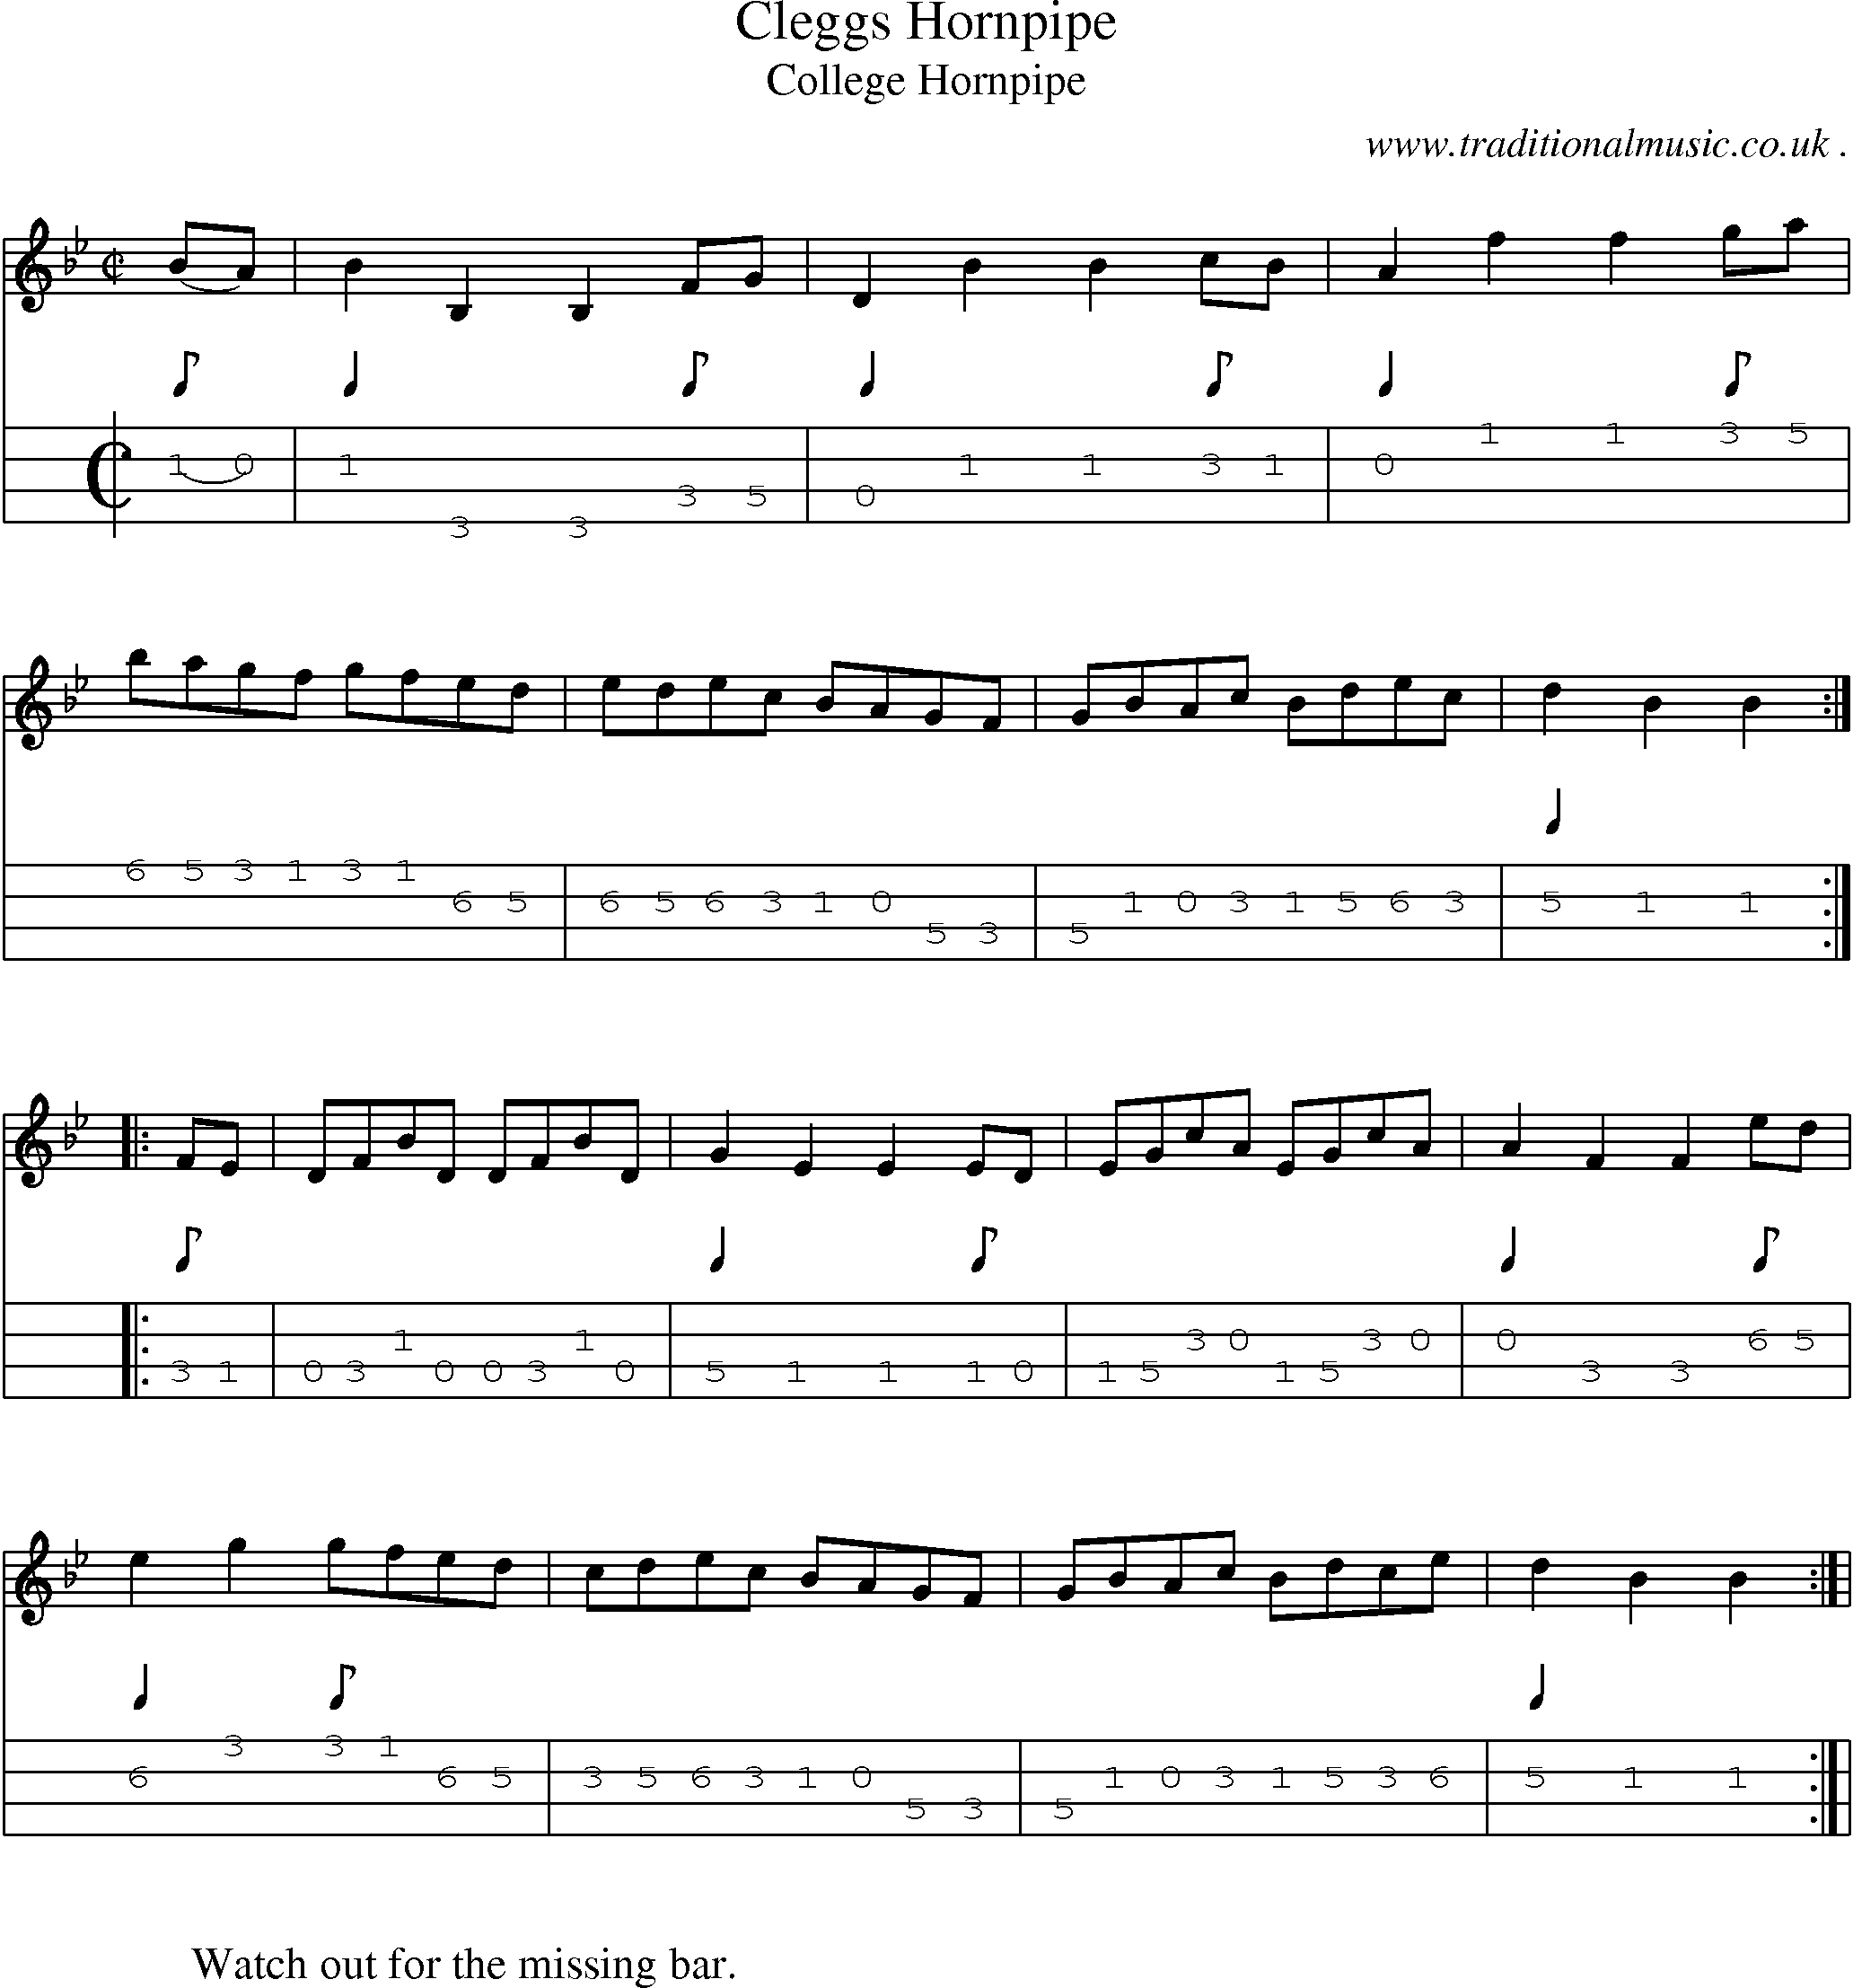 Sheet-Music and Mandolin Tabs for Cleggs Hornpipe